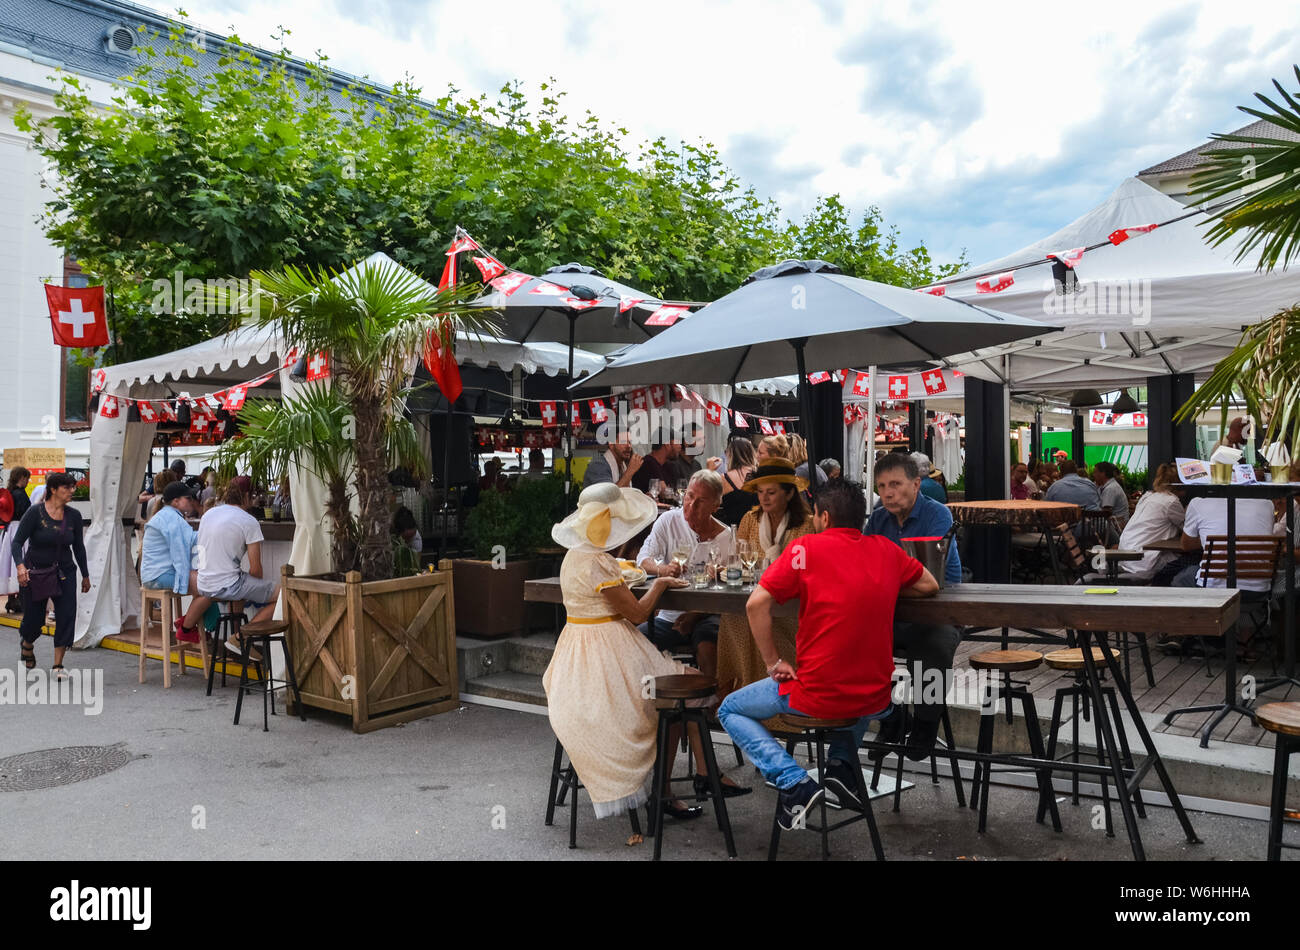 Vevey, Switzerland - Aug 1 2019: People celebrating Swiss National Day in outdoor restaurant. Celebration of the founding of the Swiss Confederacy. Independence day. Switzerland flags decoration. Stock Photo